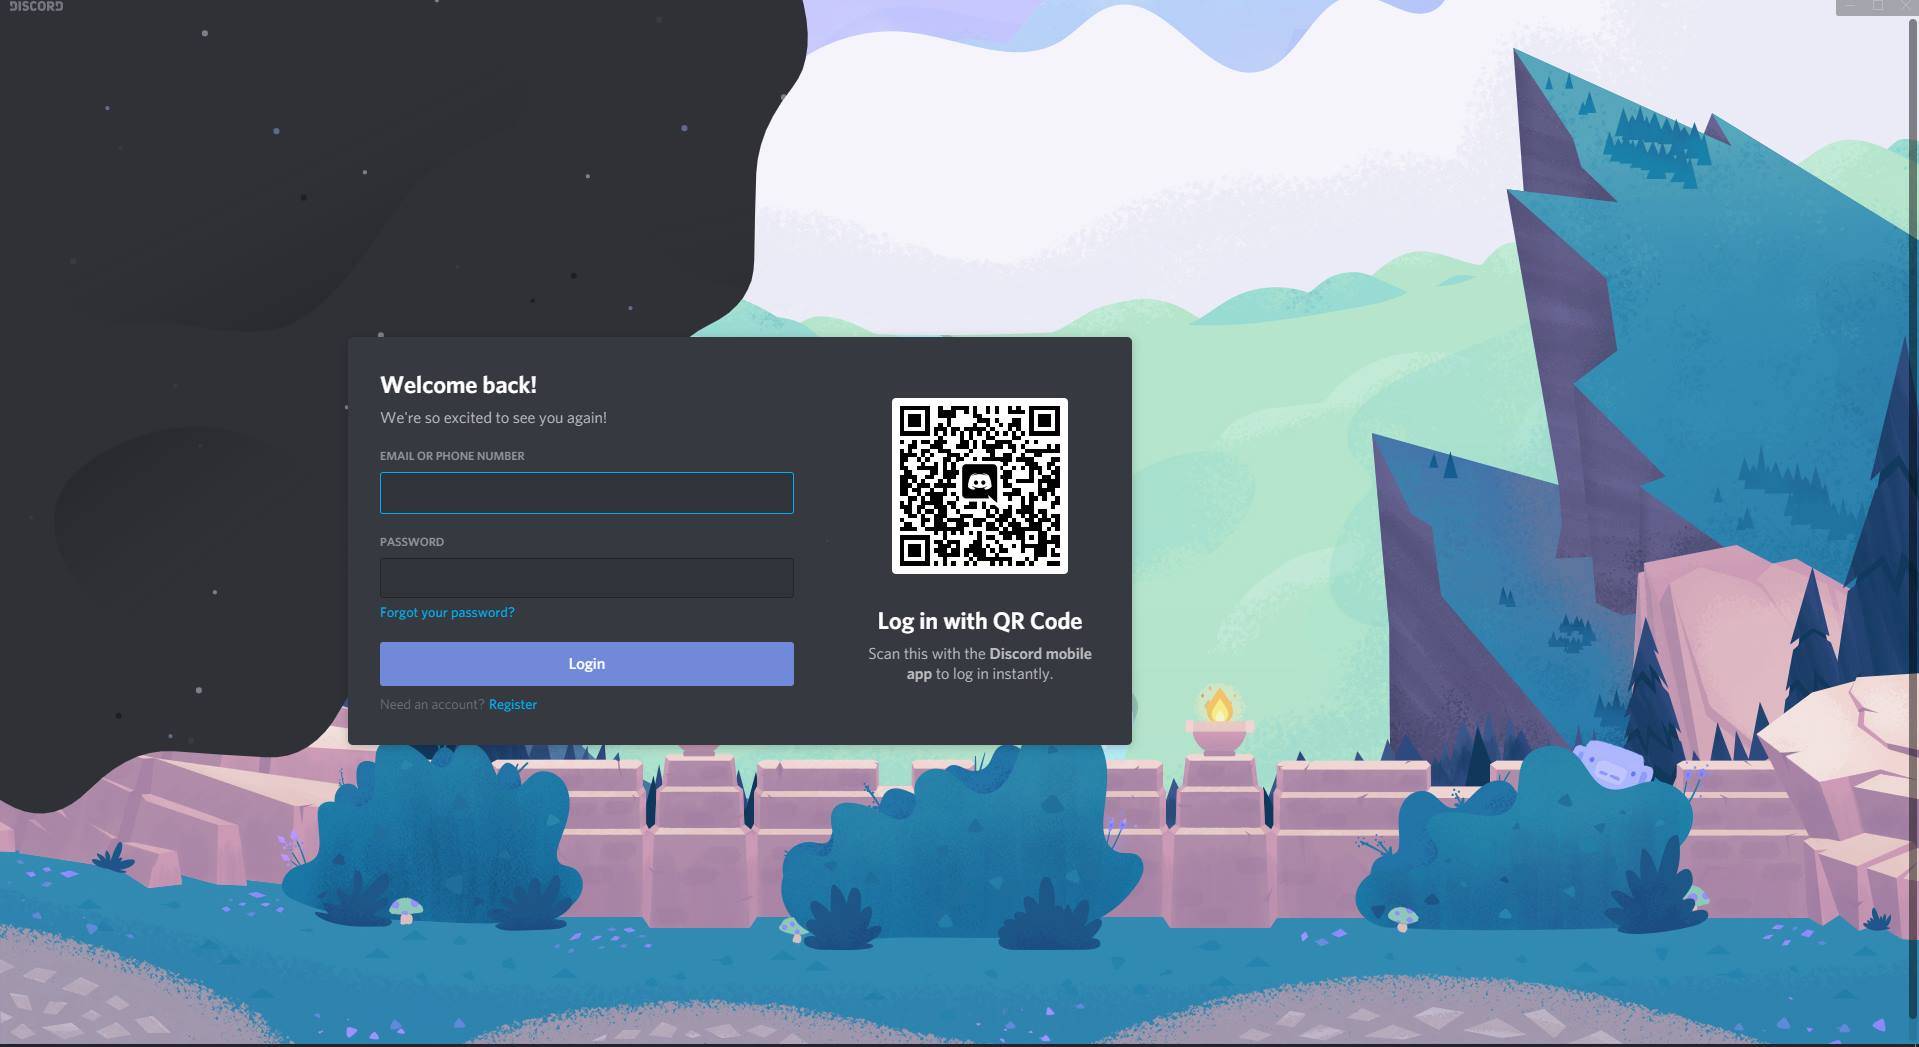 stream netflix on discord log in to discord via credentials or qr code